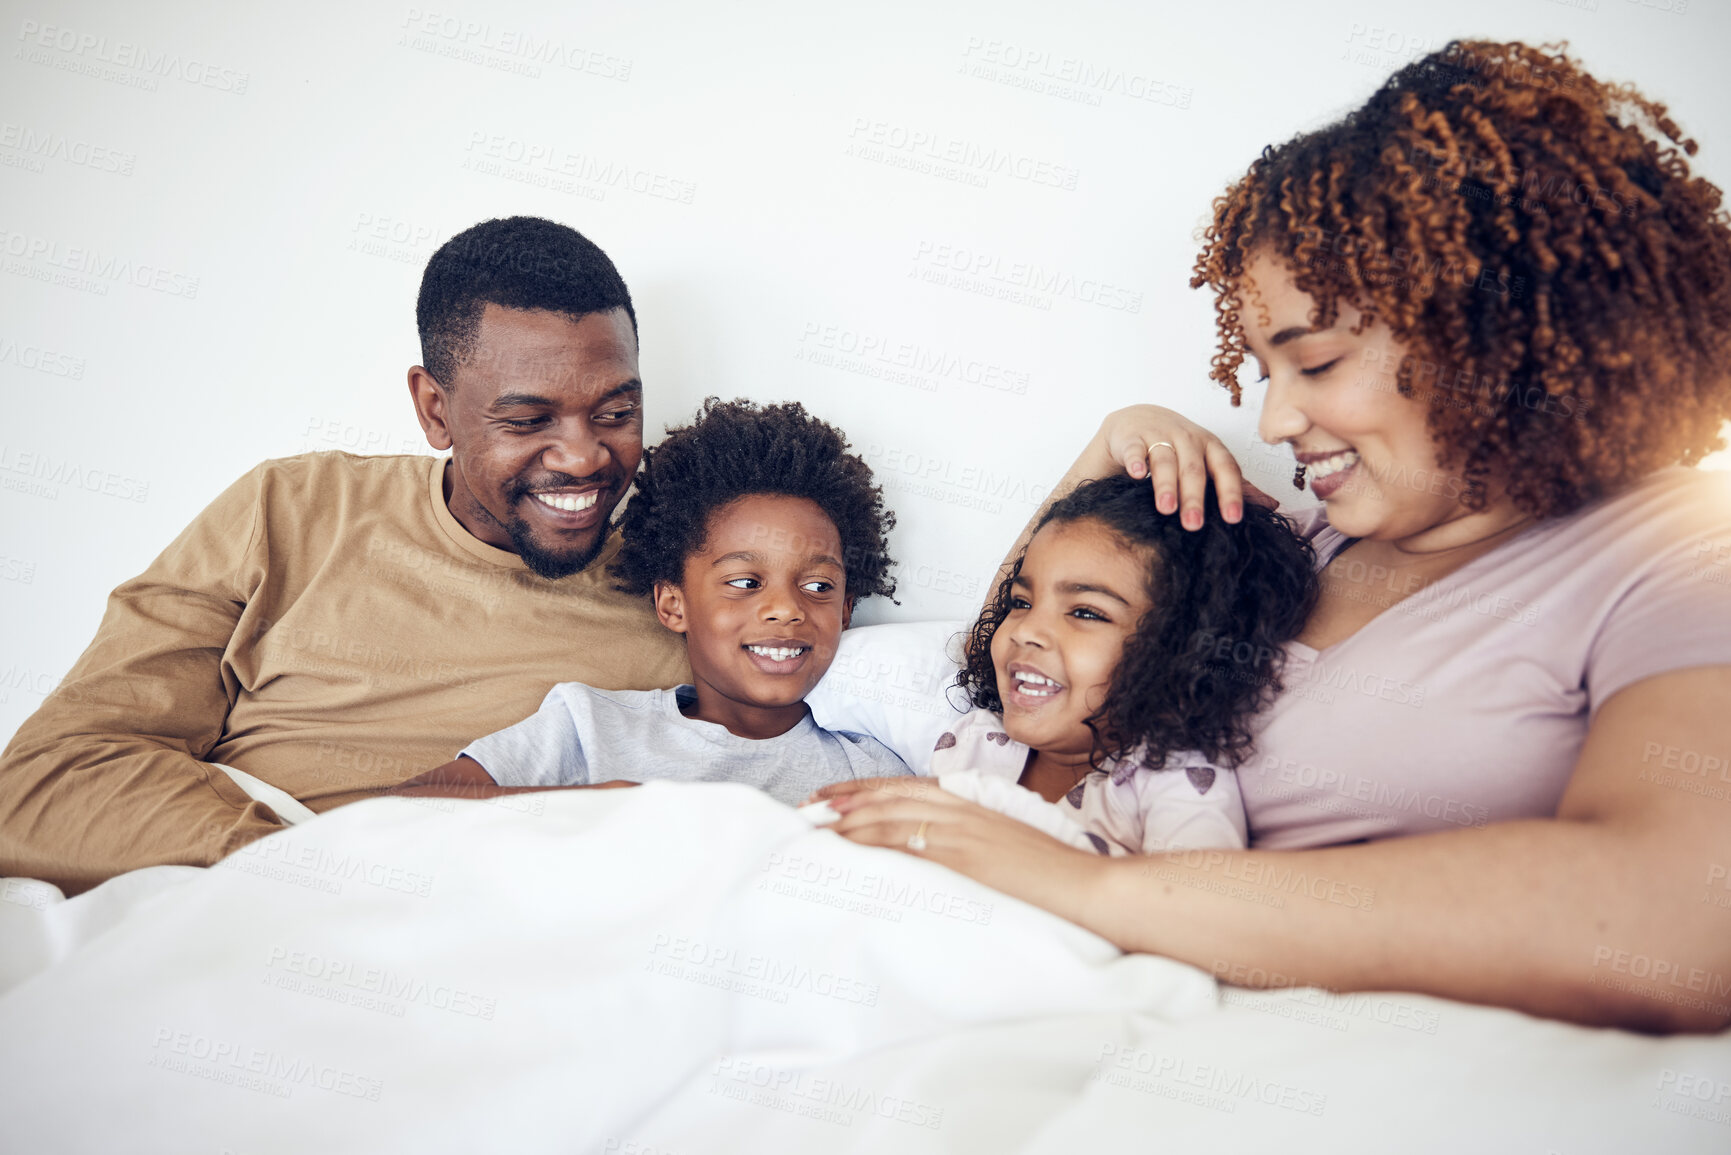 Buy stock photo Family, father and mother with children on bed relaxing together for fun morning or holiday break at home. Happy dad, mom and kids relax and lying in bedroom enjoying comfort and bonding time